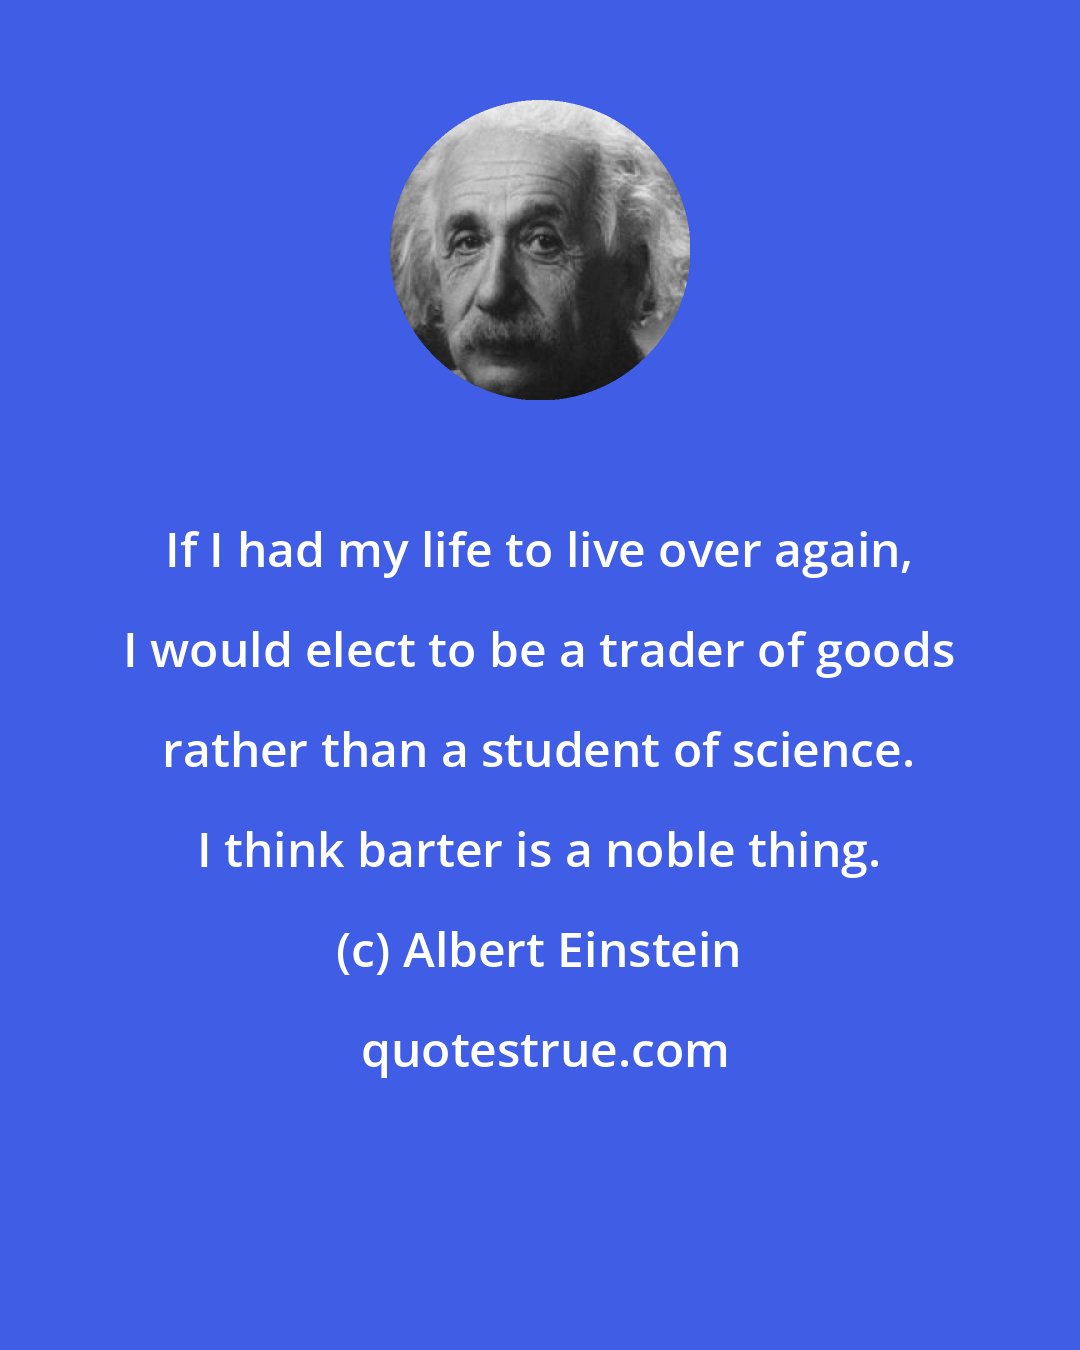 Albert Einstein: If I had my life to live over again, I would elect to be a trader of goods rather than a student of science. I think barter is a noble thing.